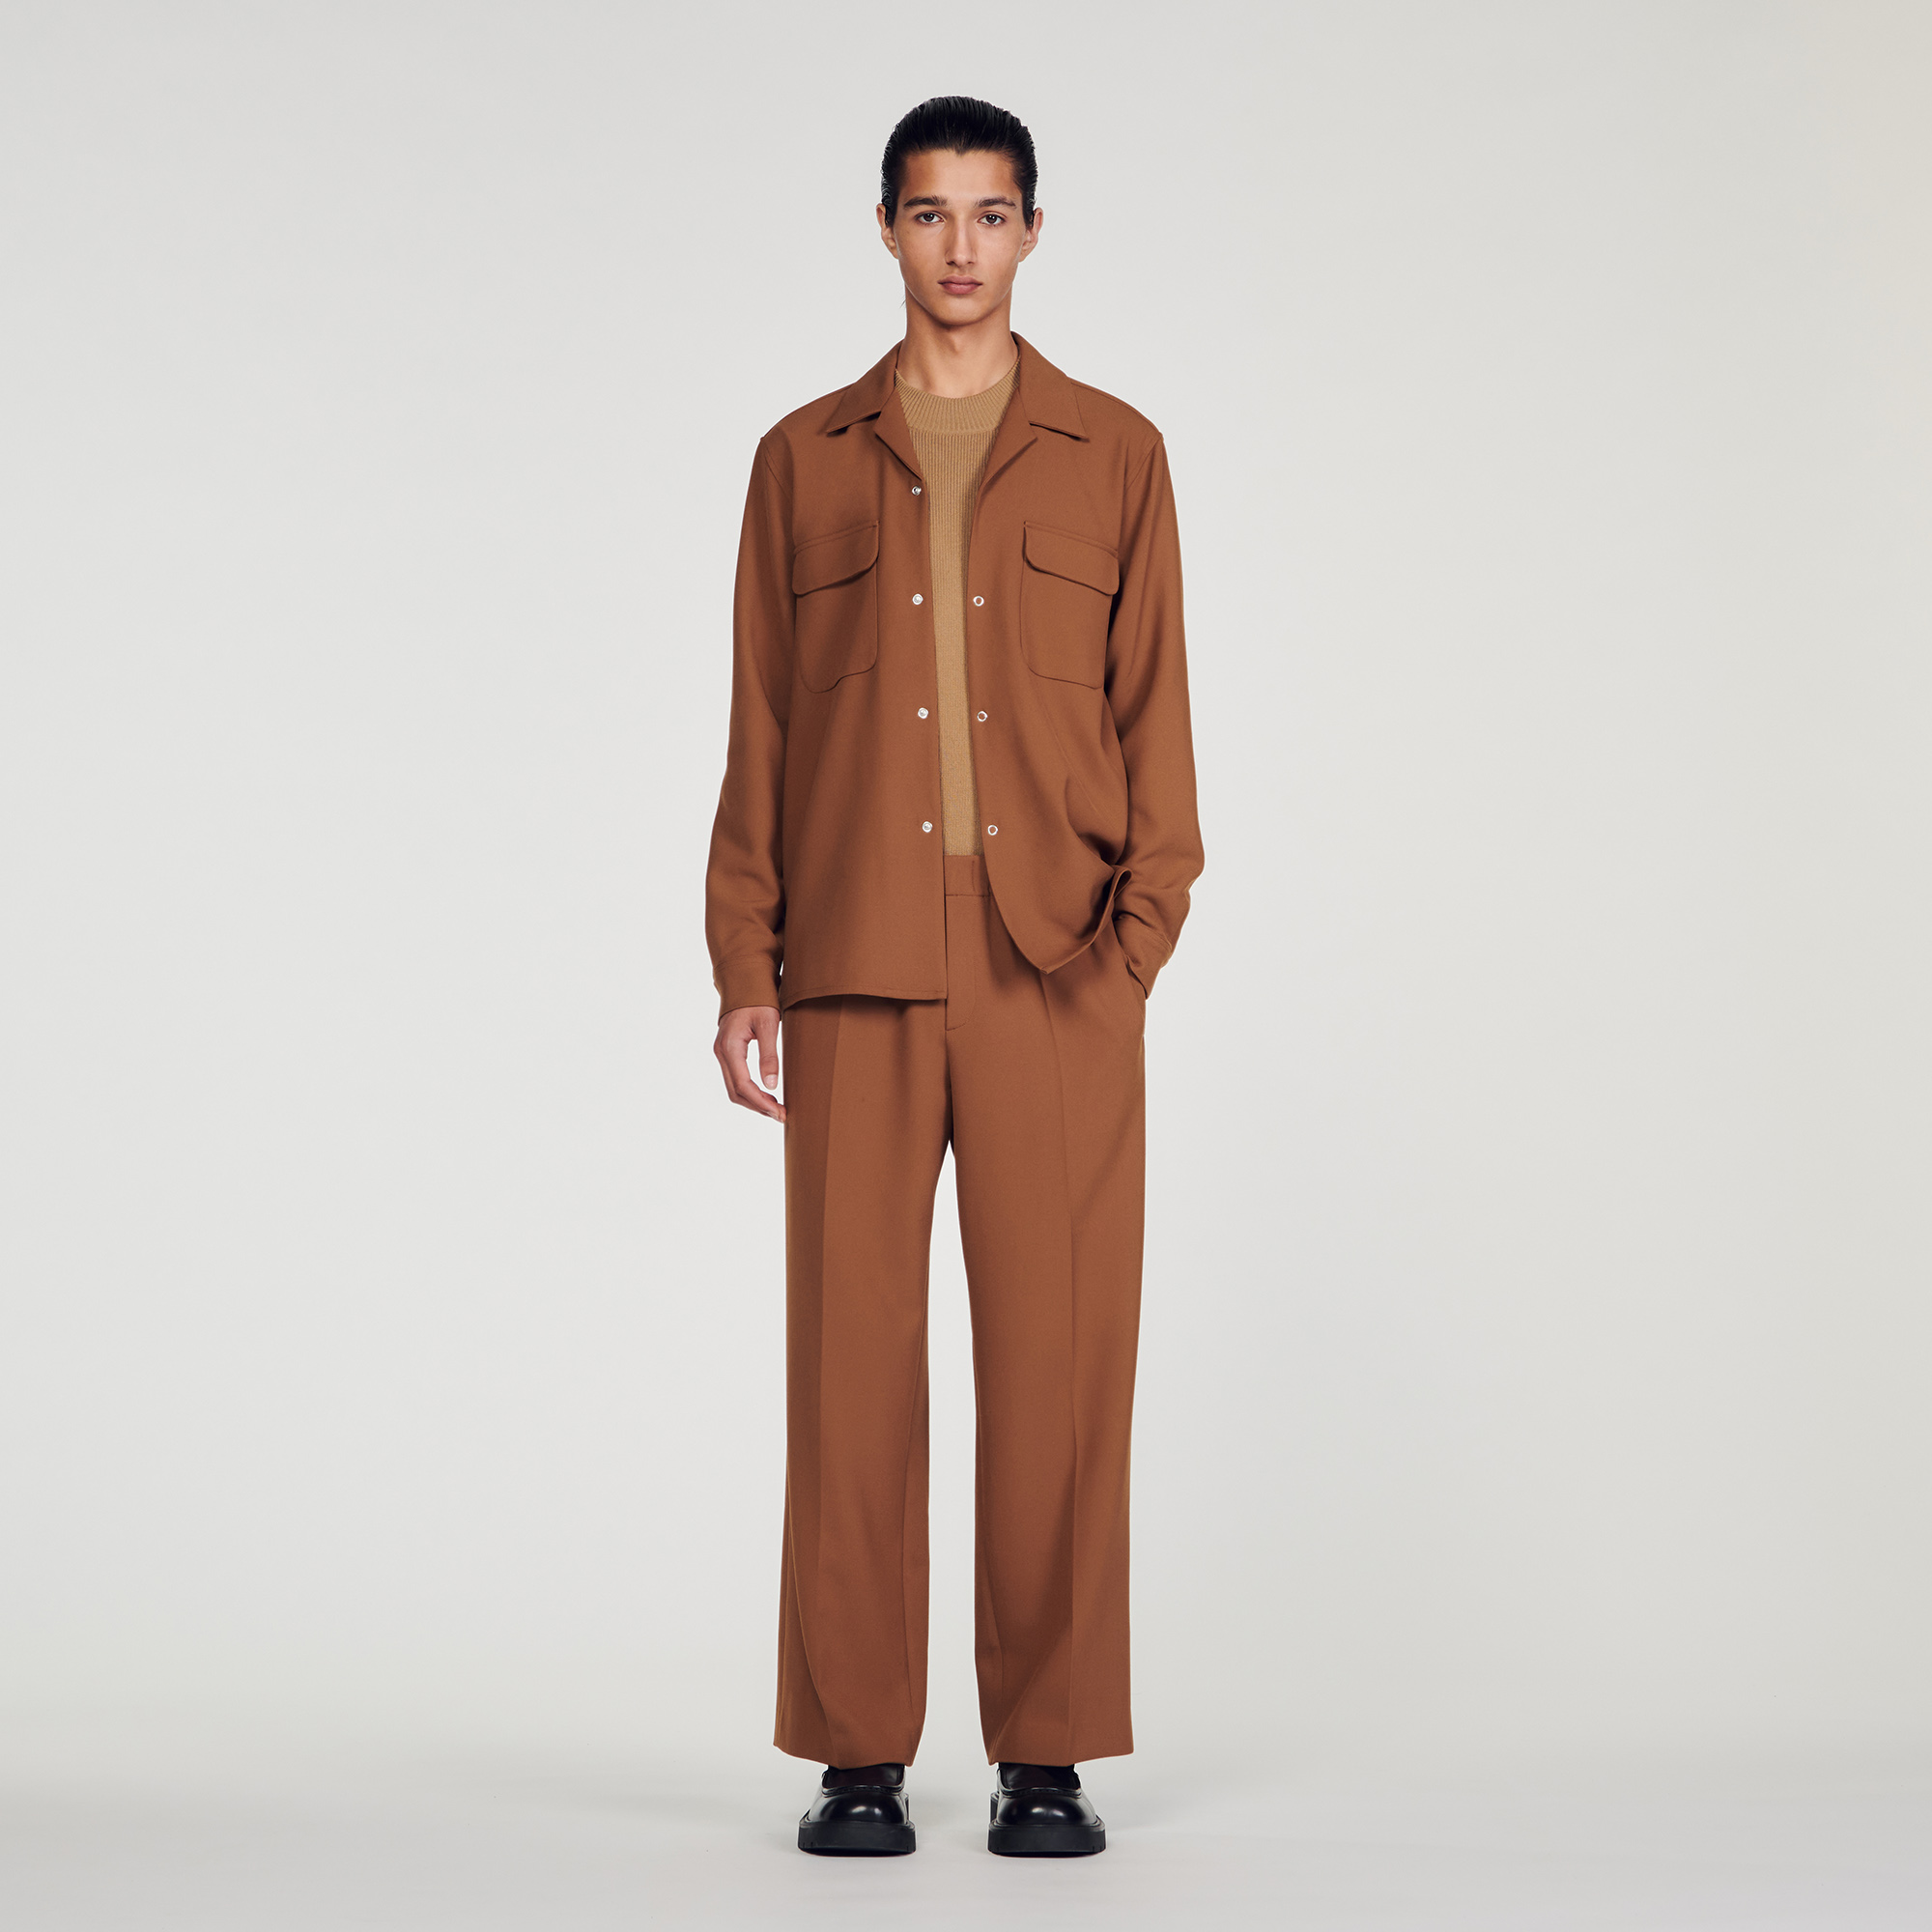 Sandro polyester Oversized shirt featuring a shark collar and long sleeves with buttoned cuffs, a button fastening and two patch pockets on the chest